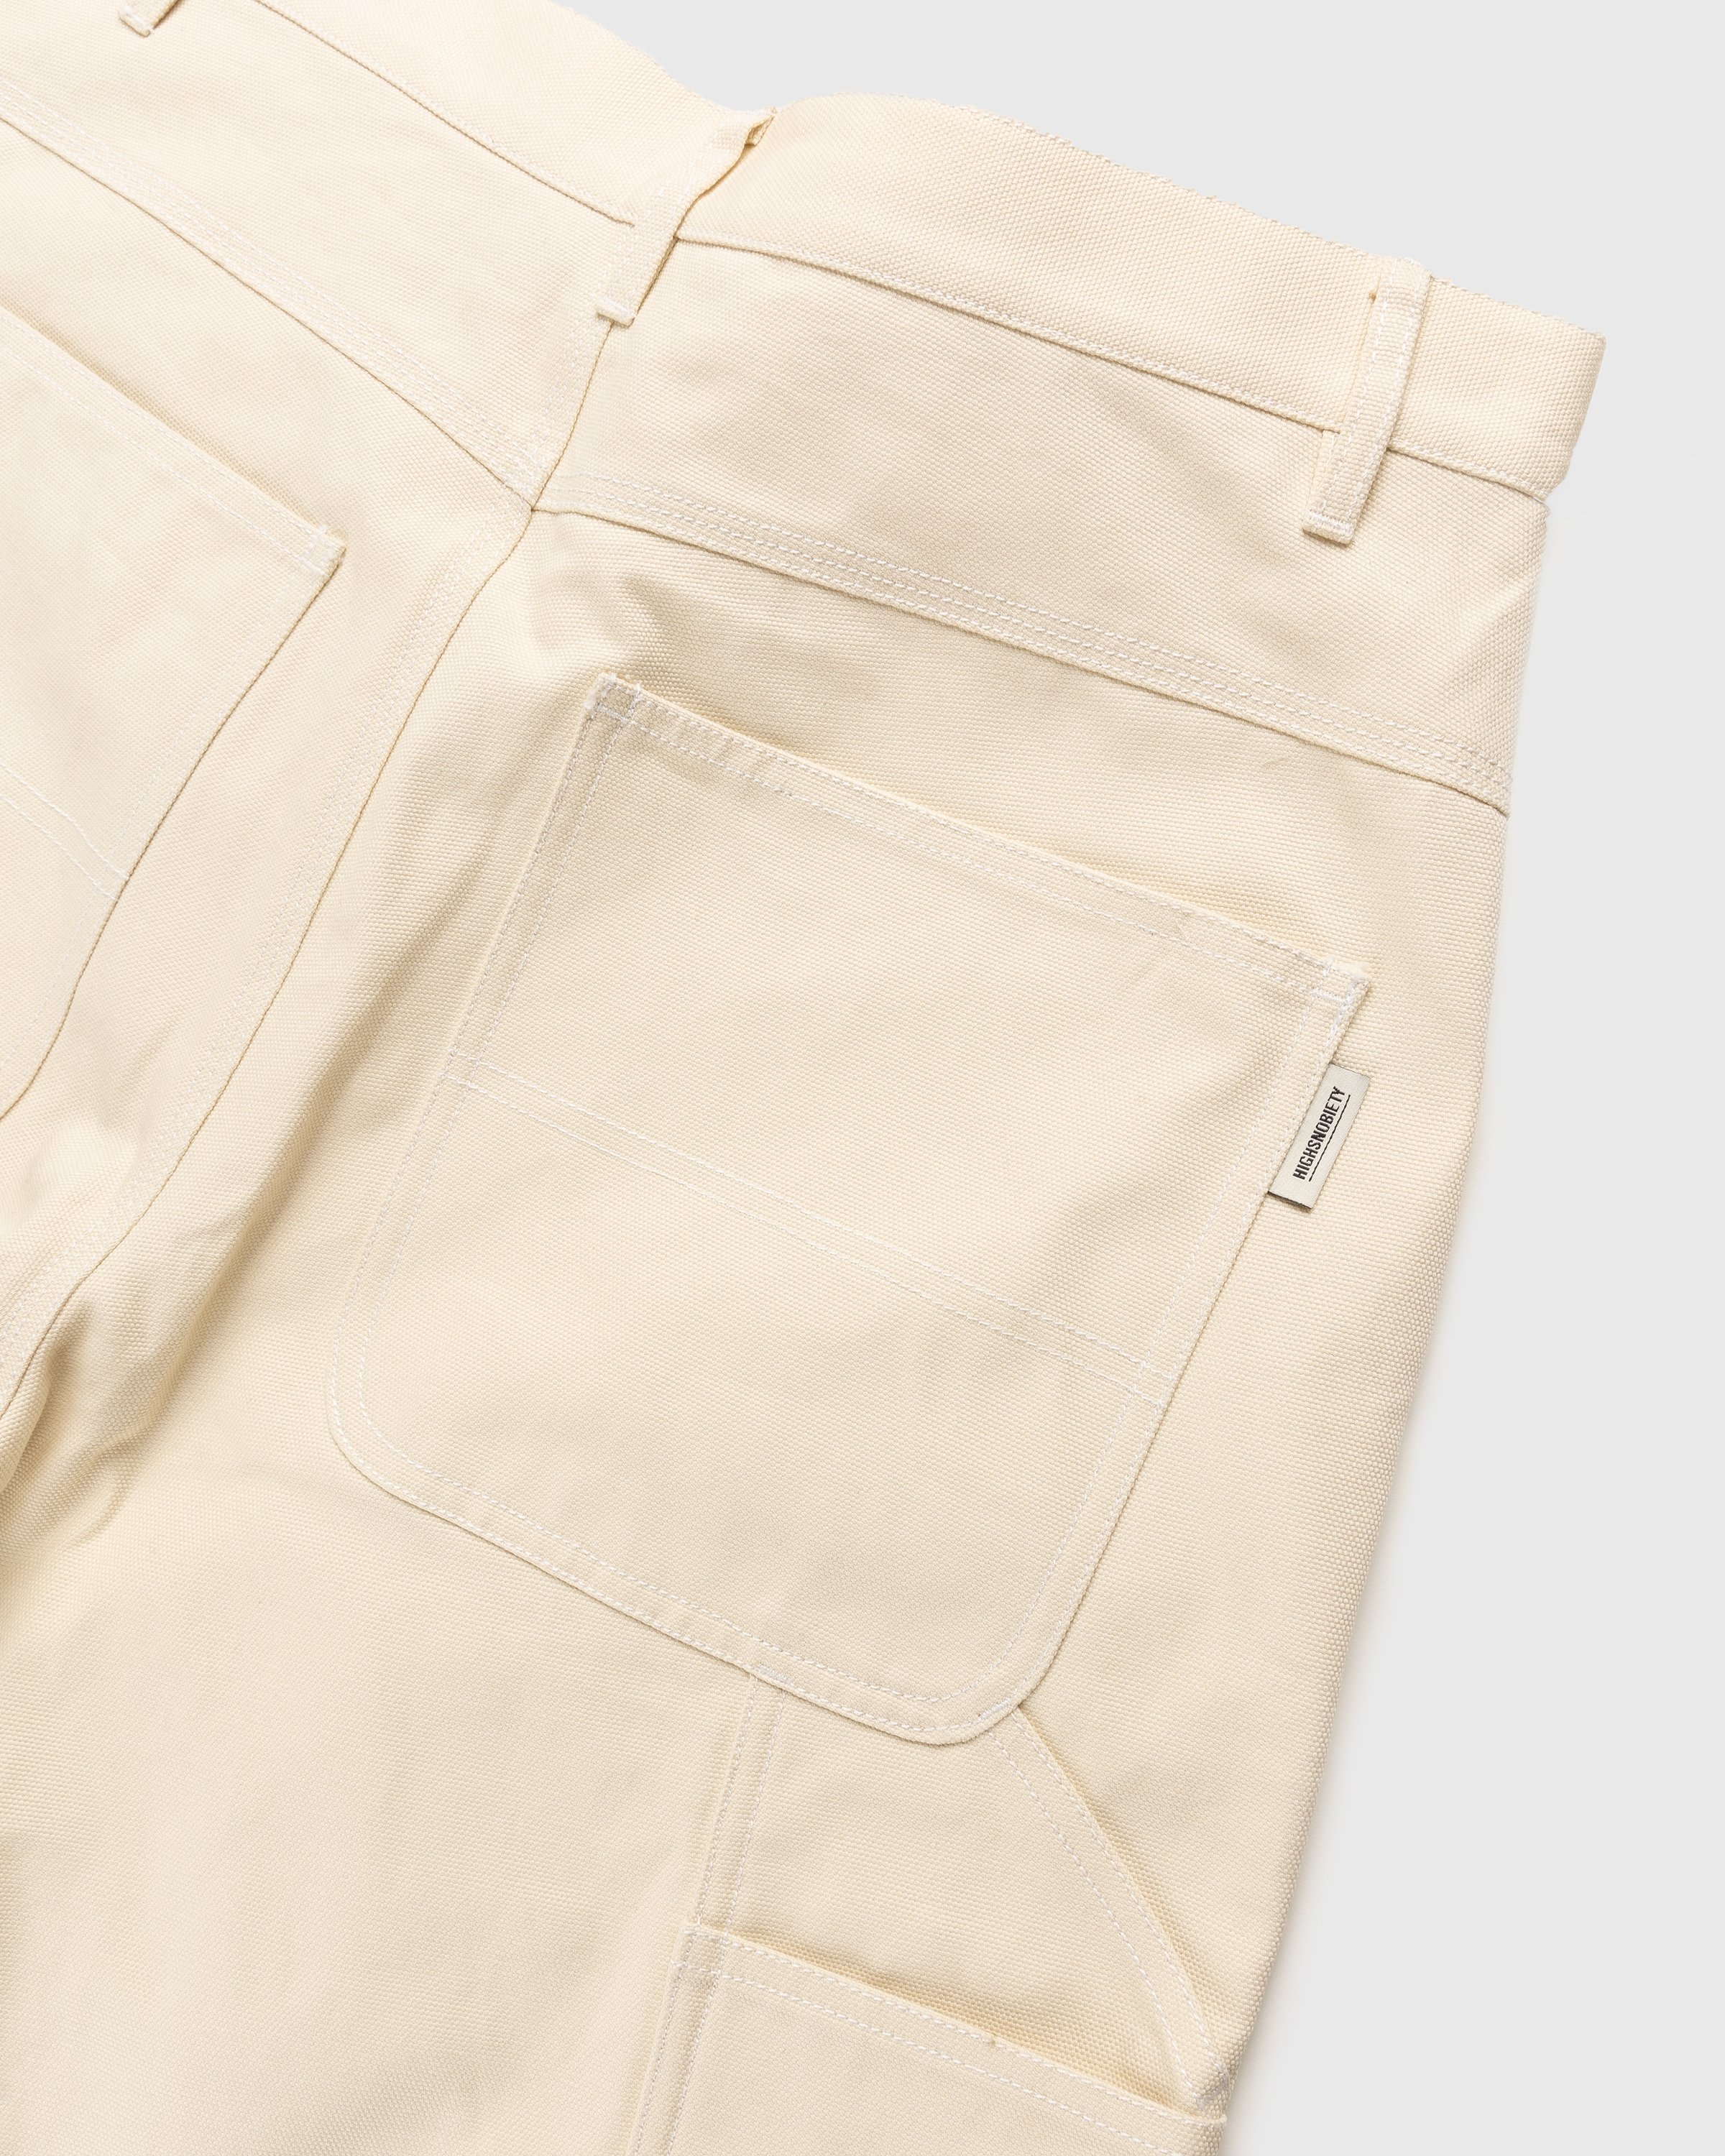 RUF x Highsnobiety - Cotton Work Pants Natural - Clothing - Beige - Image 5